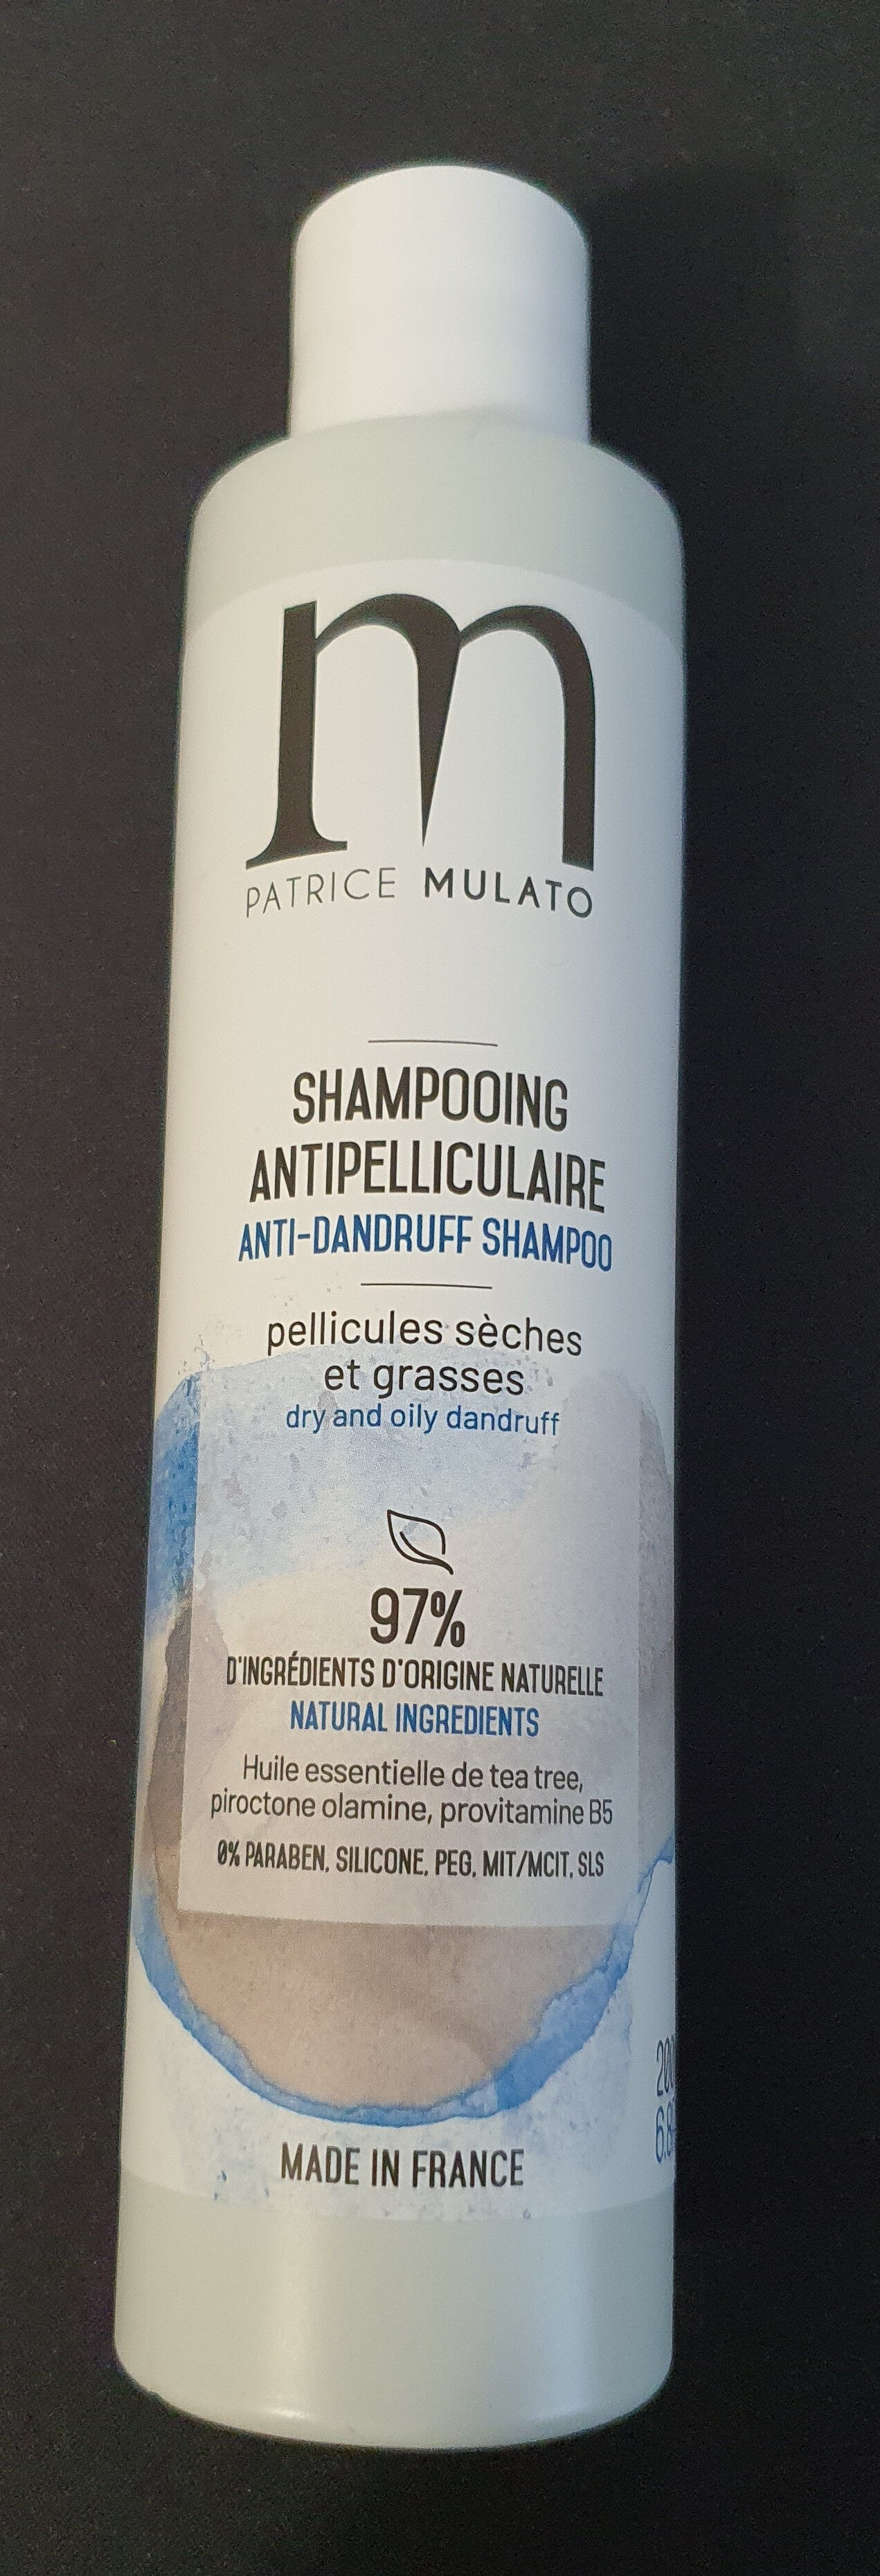 shampooing antipelliculaire - Product - en